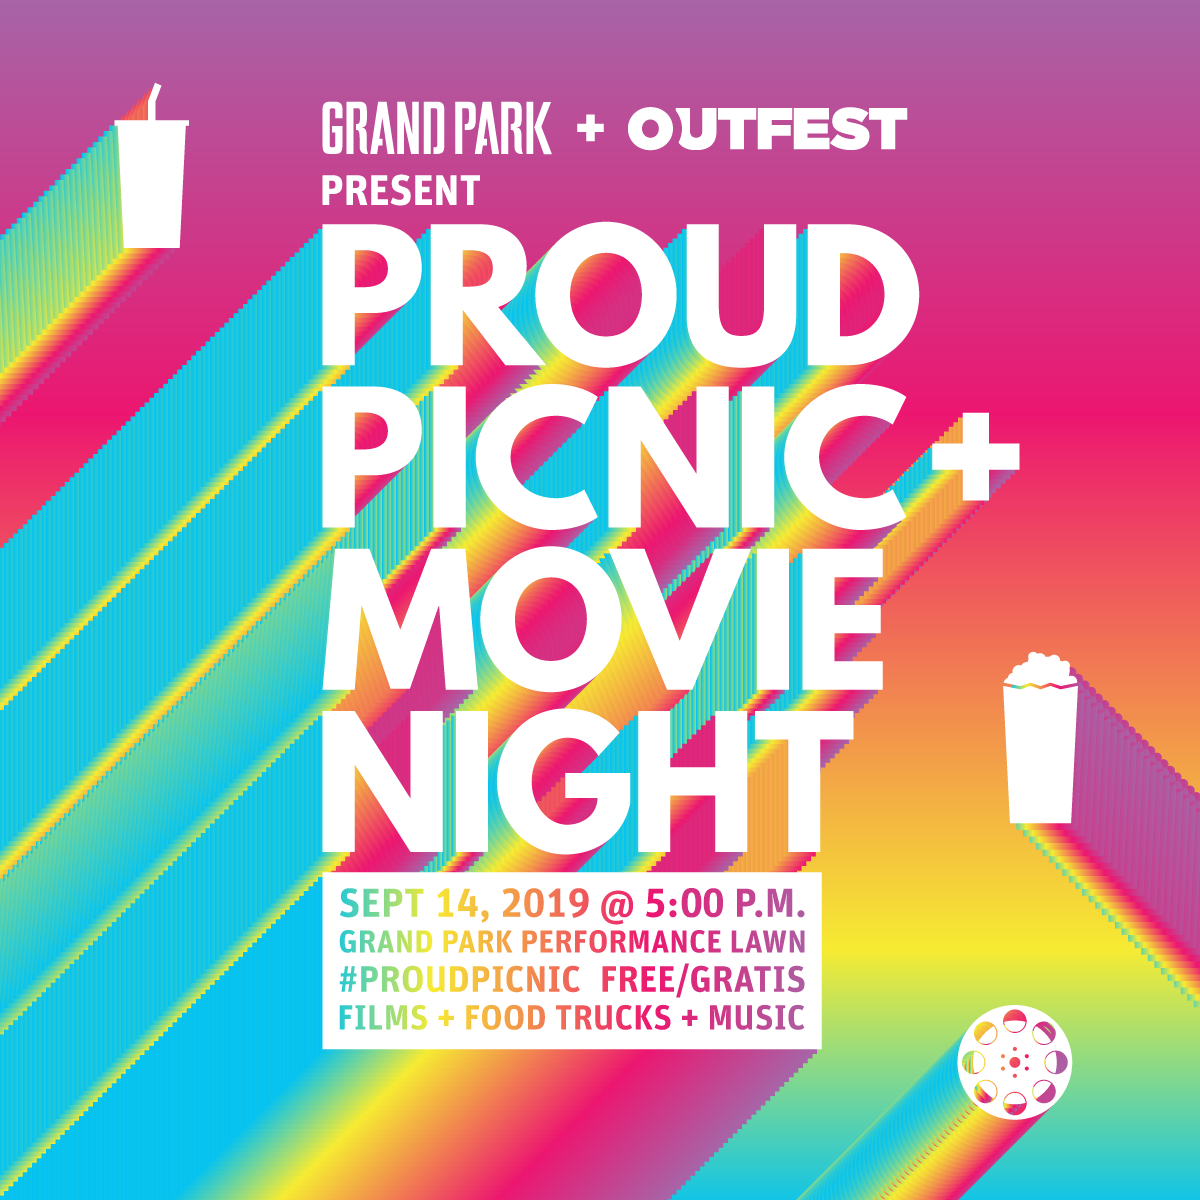 Grand Park and Outfest Present PROUD Picnic + Movie Night 2019 @ Grand Park (Performance Lawn b/t Grand Ave. + Hill St.) | Los Angeles | California | United States